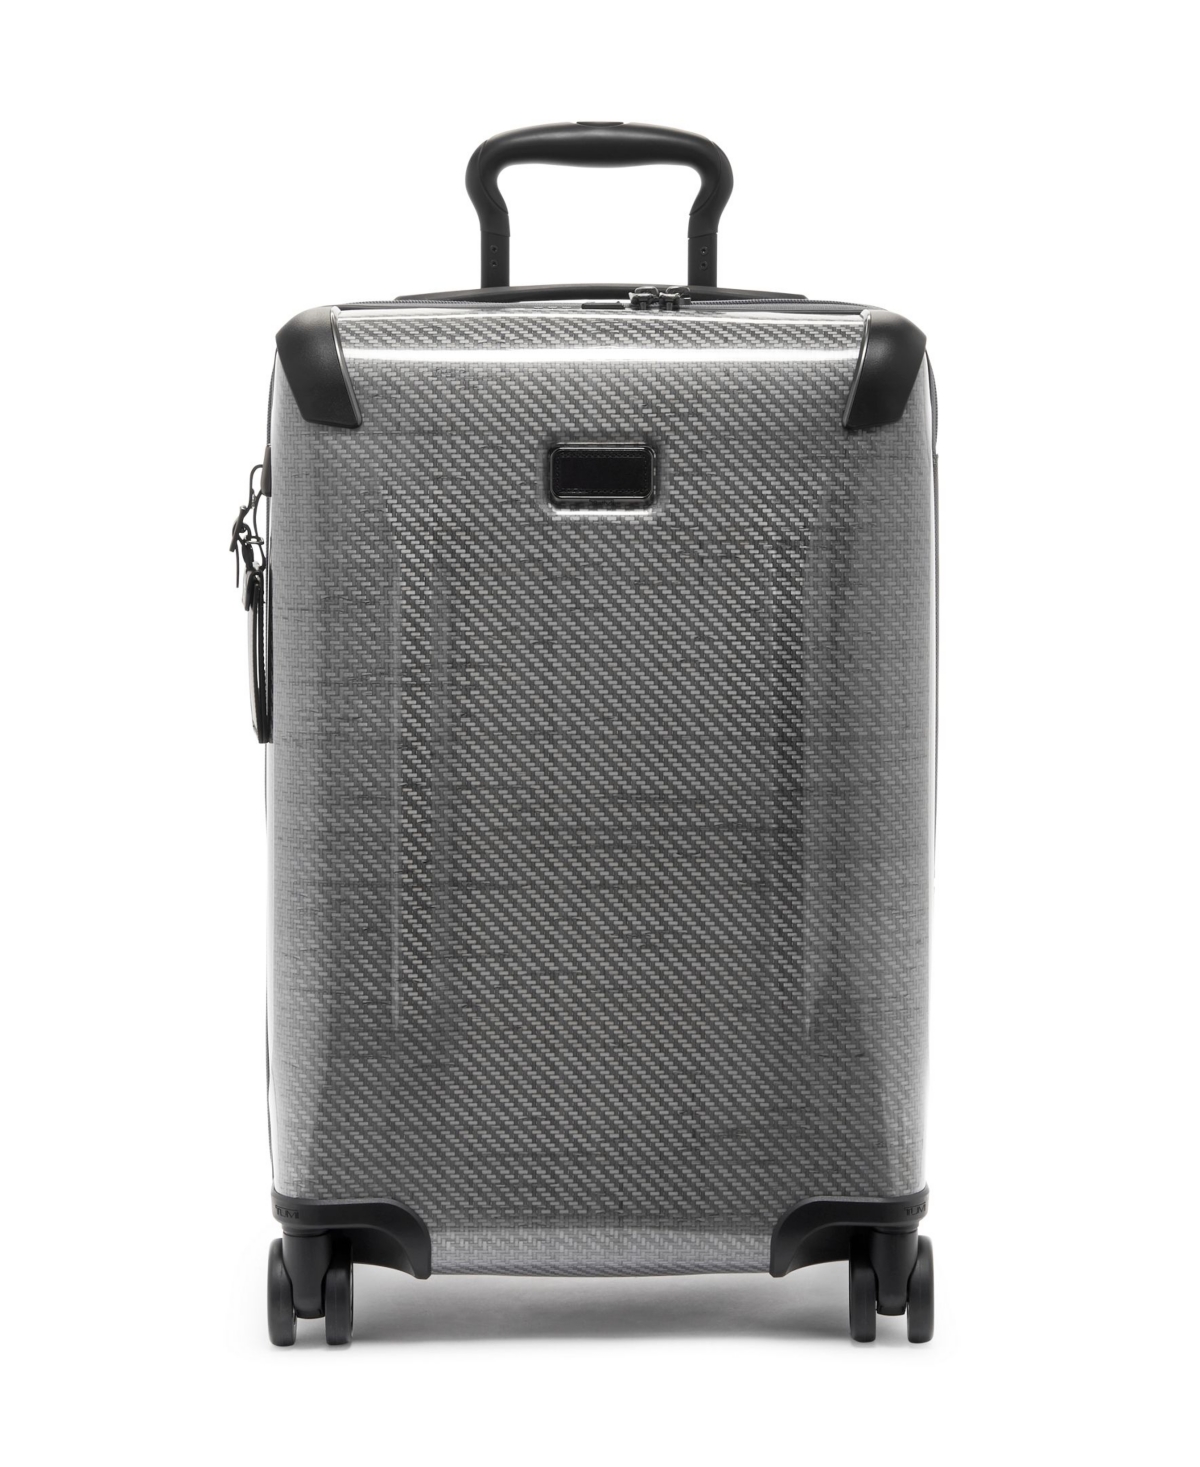 Tumi Tegra Lite 21.75" International Expandable Carry-on Suitcase In T-graphite